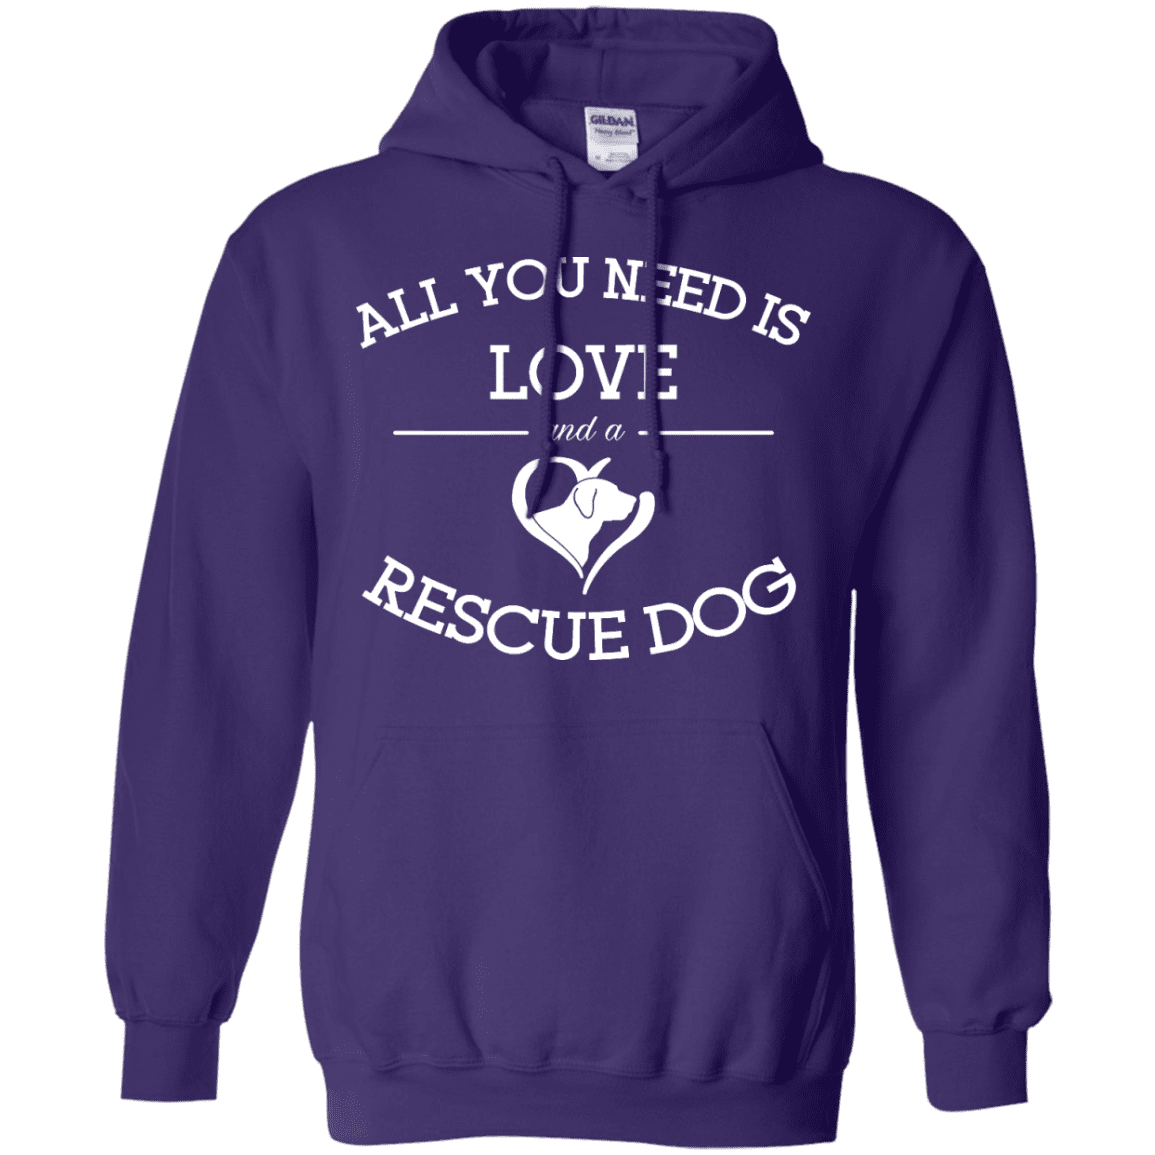 Love and a Rescue Dog - Hoodie.